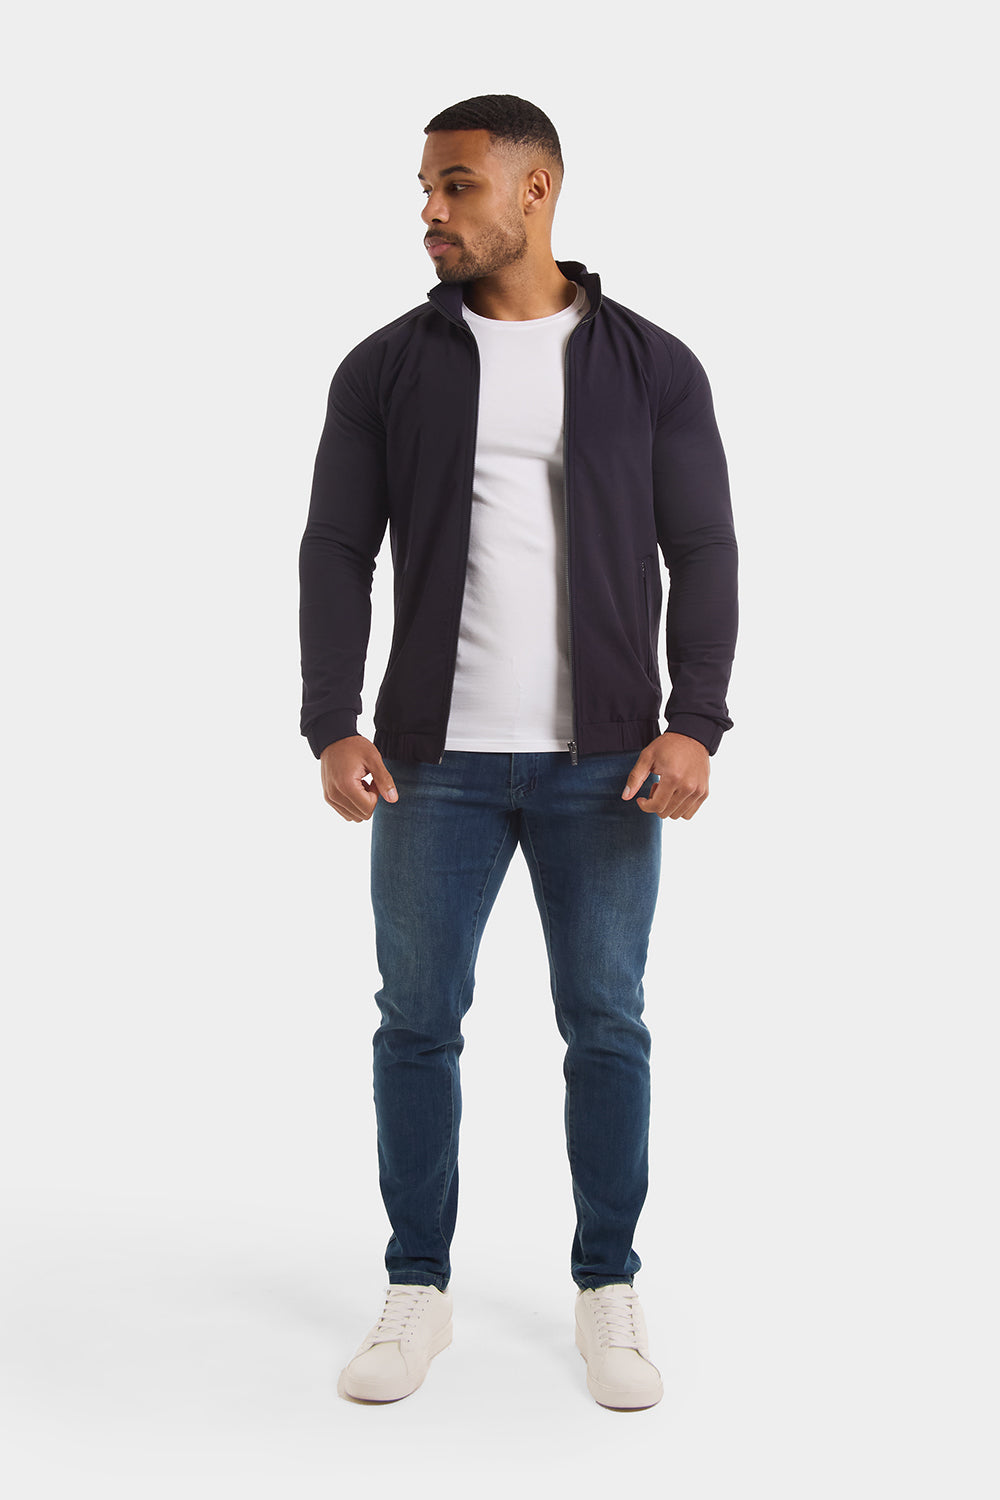 Everyday Henley in Navy - TAILORED ATHLETE - USA